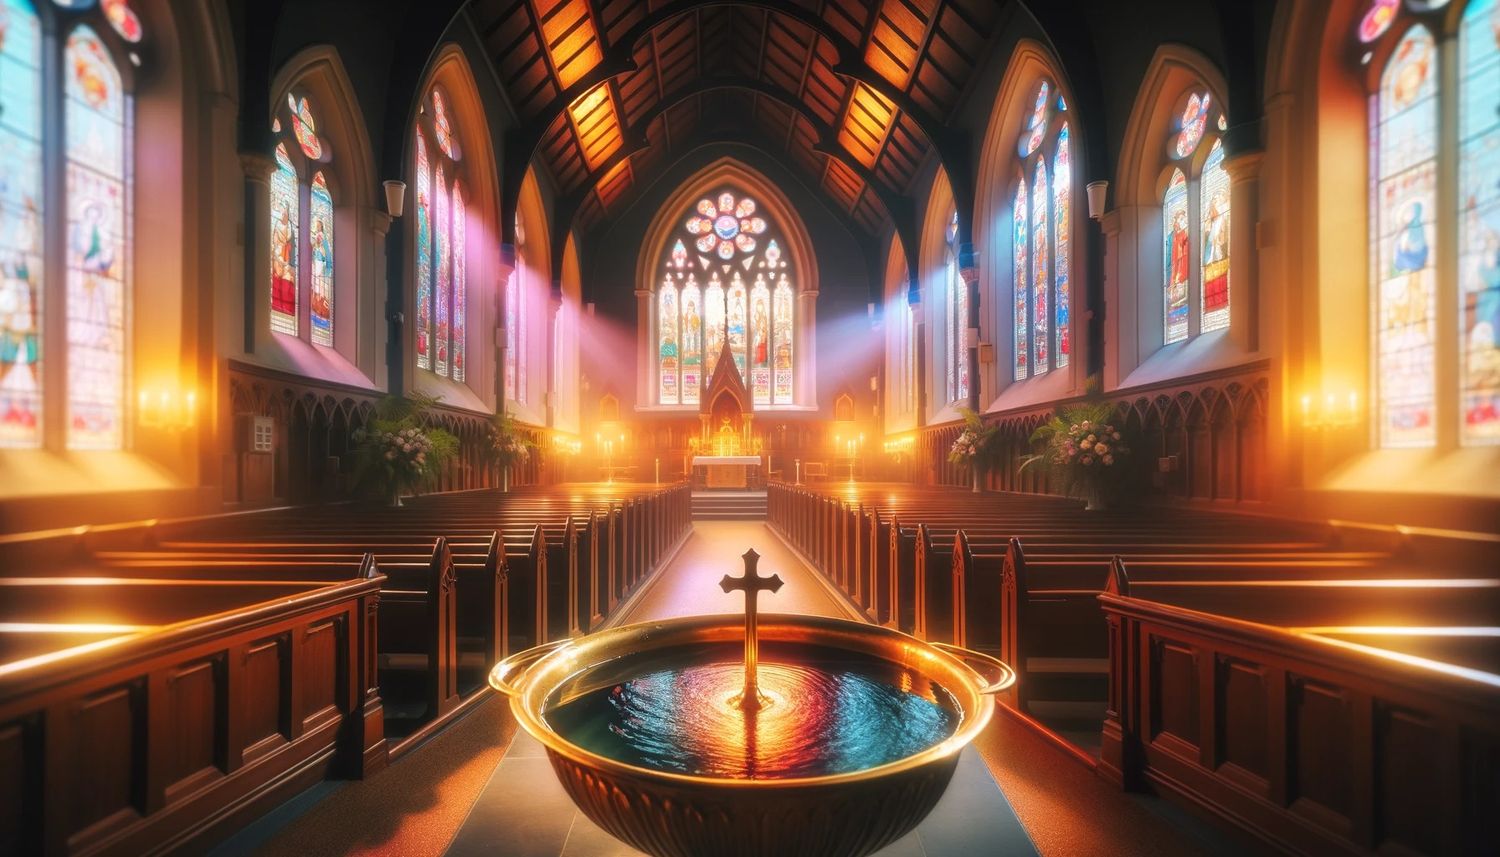 What Does The Cross Mean In Baptism